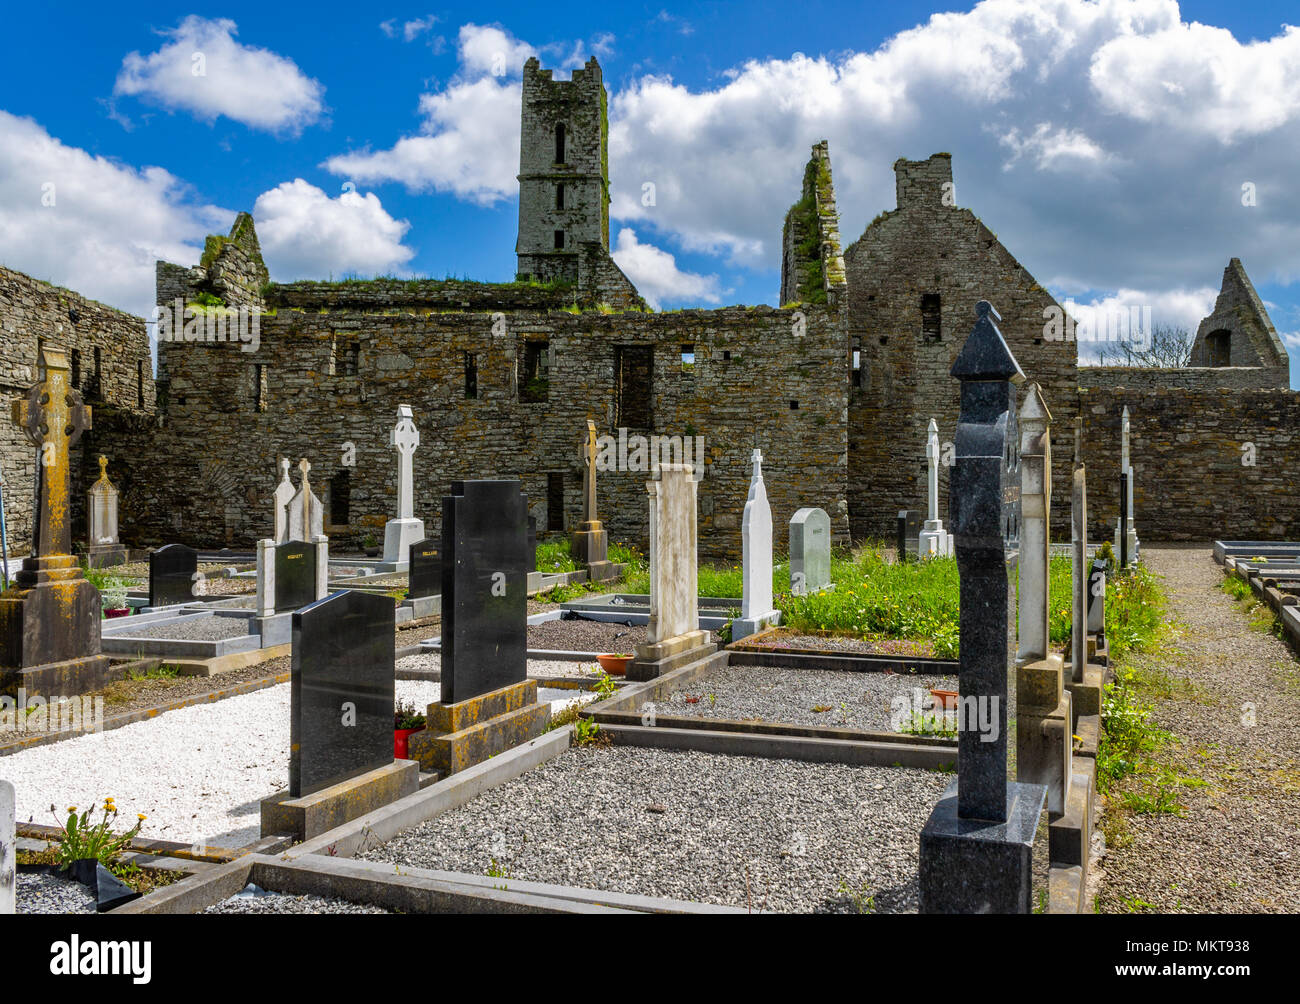 Views around timoleague friary in west cork ireland, the friary has been on the site since approximately 1240AD. A seat of learning later burnt down. Stock Photo